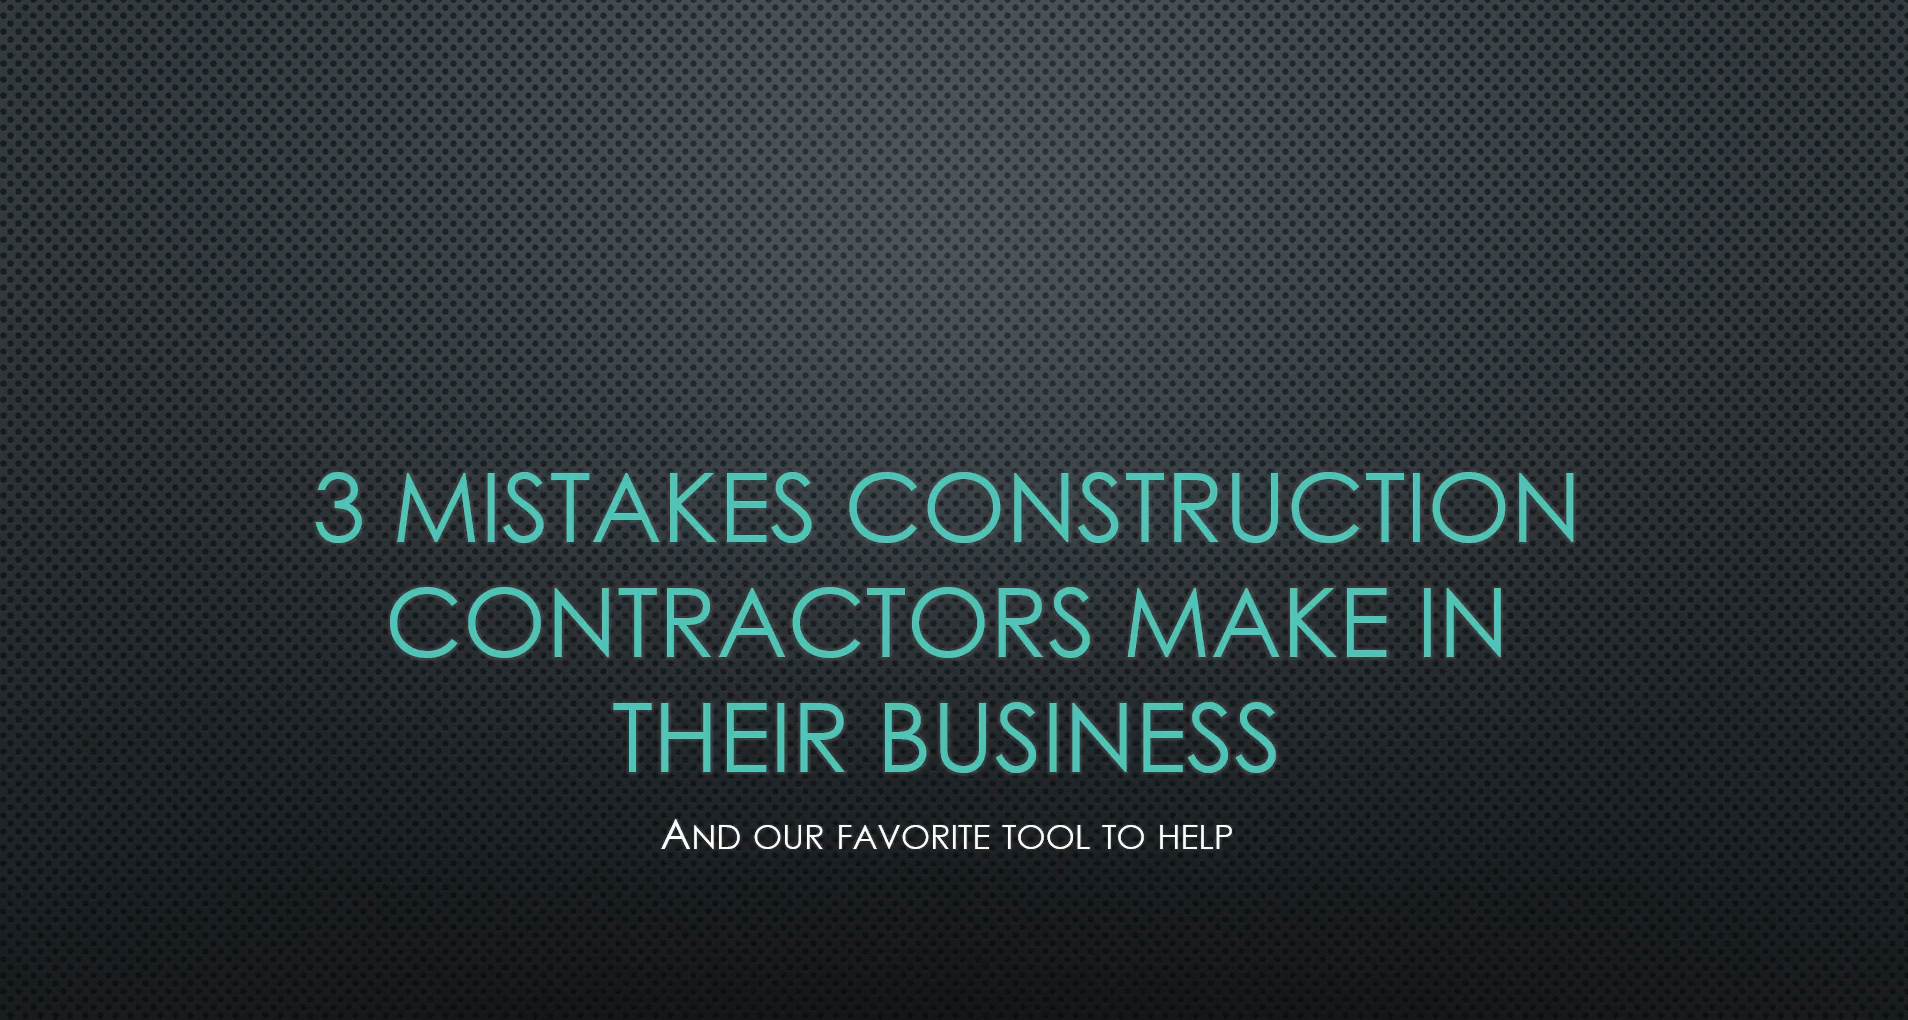 3 Mistakes Construction Contractors Make–And a Tool to Help